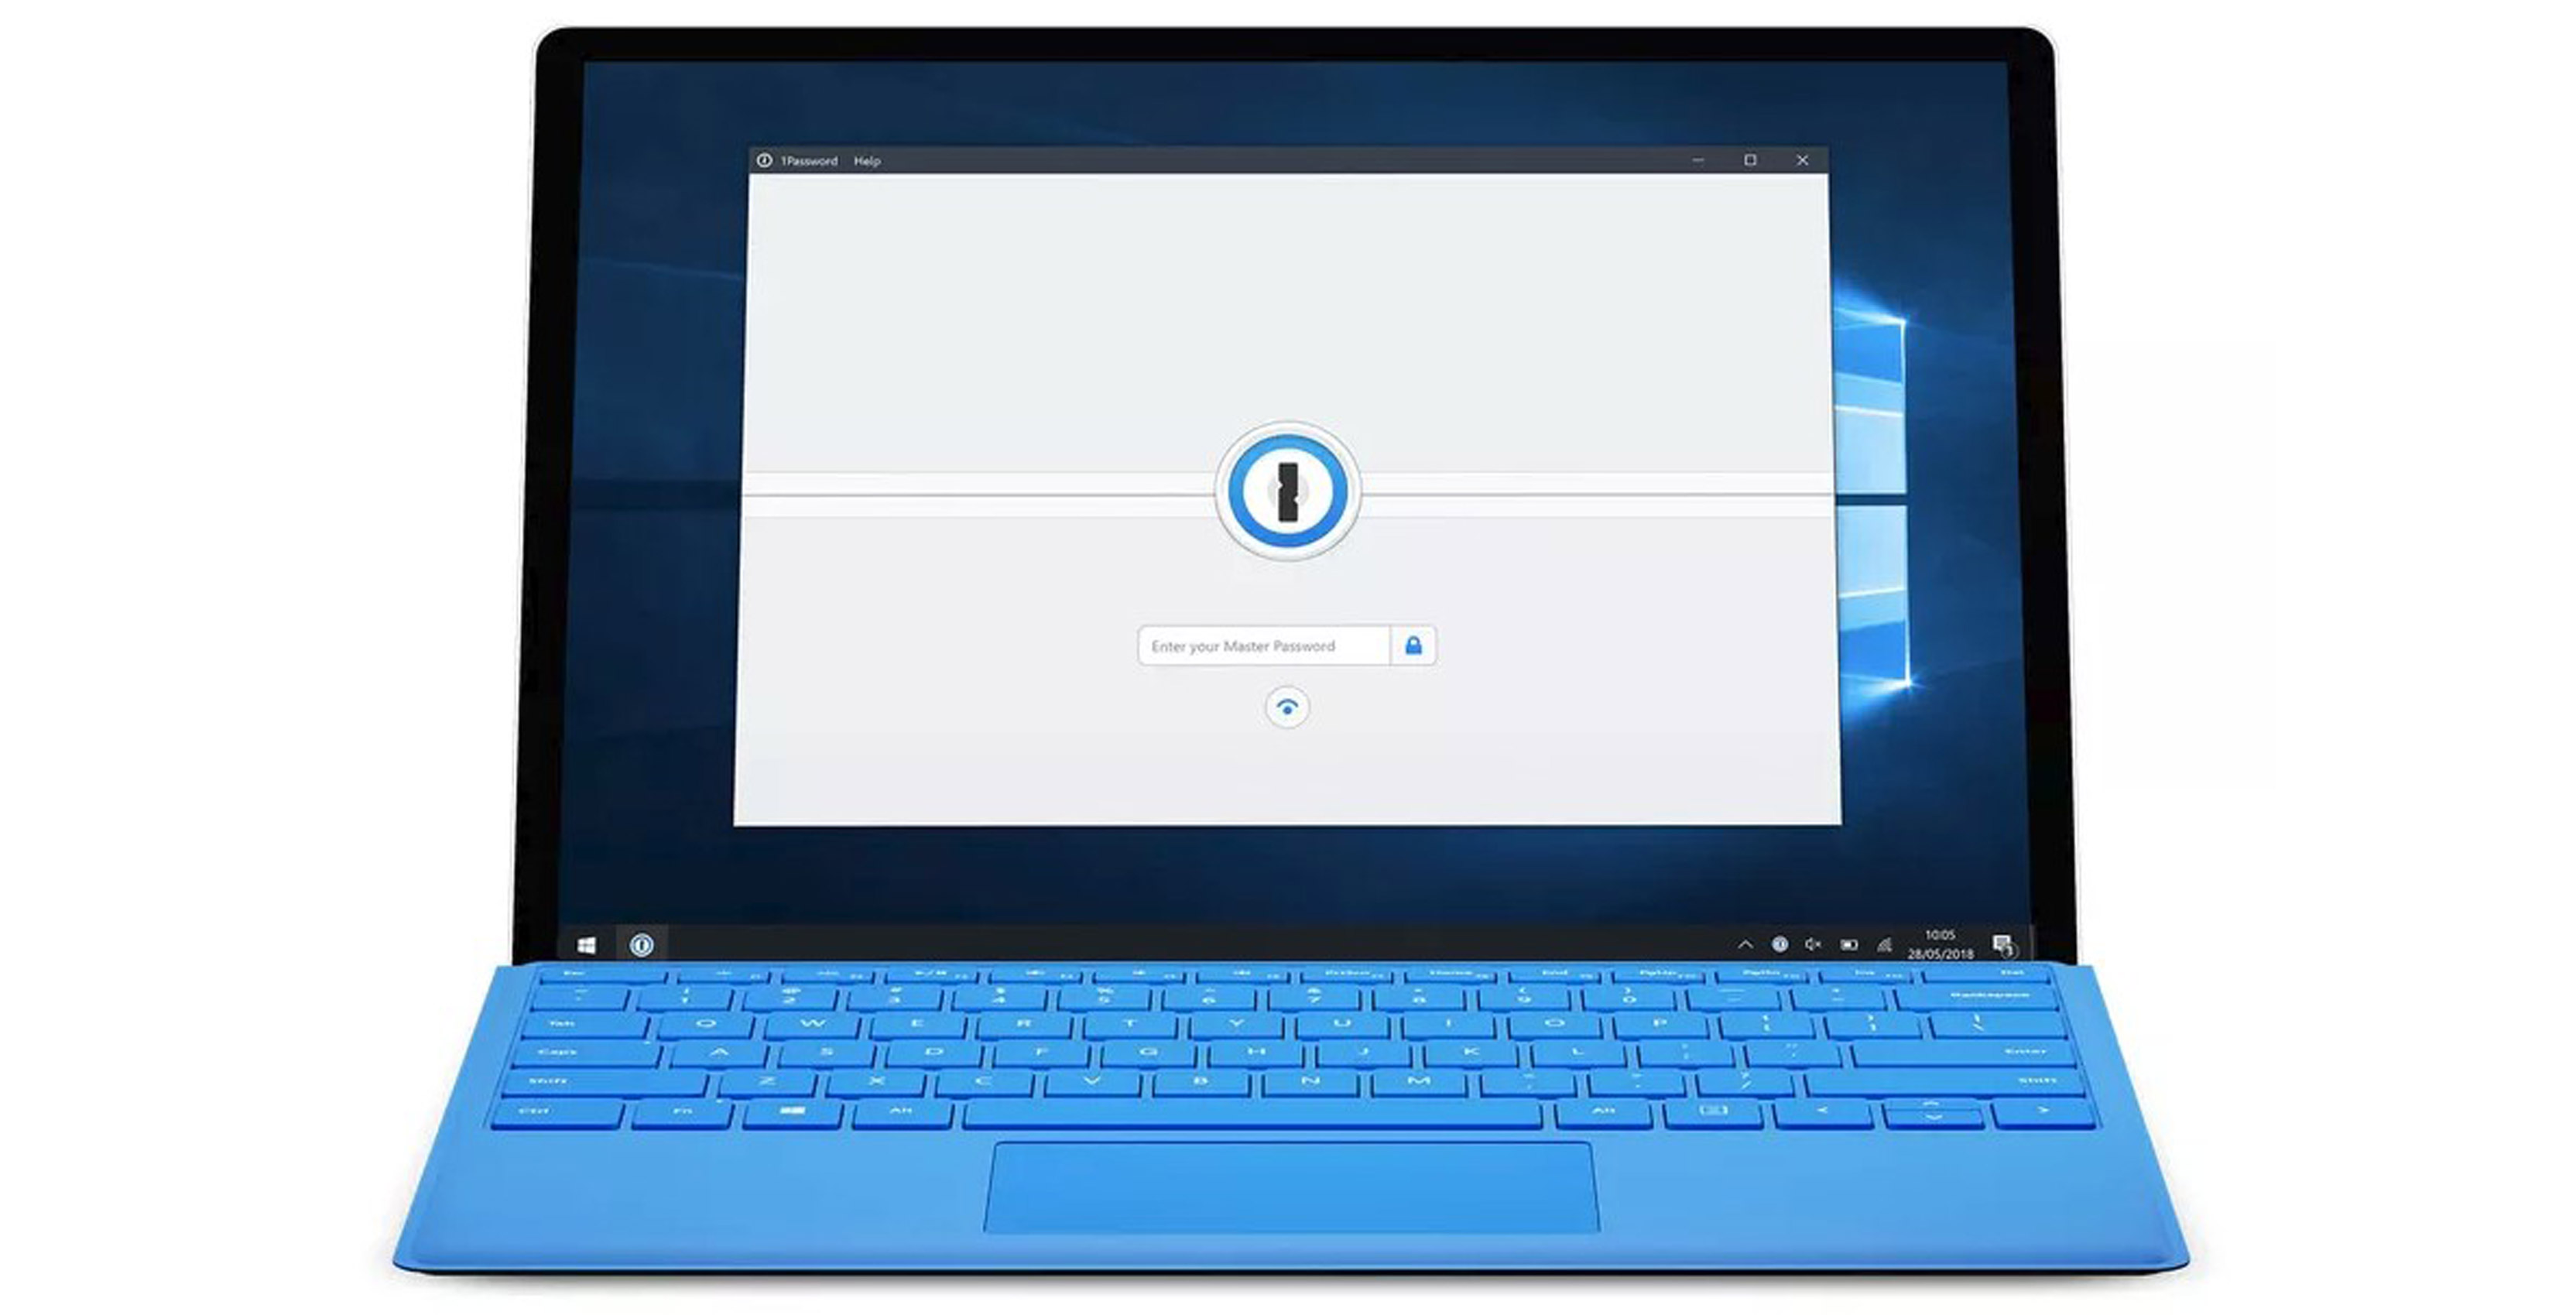 1Password 7 is now available on Windows